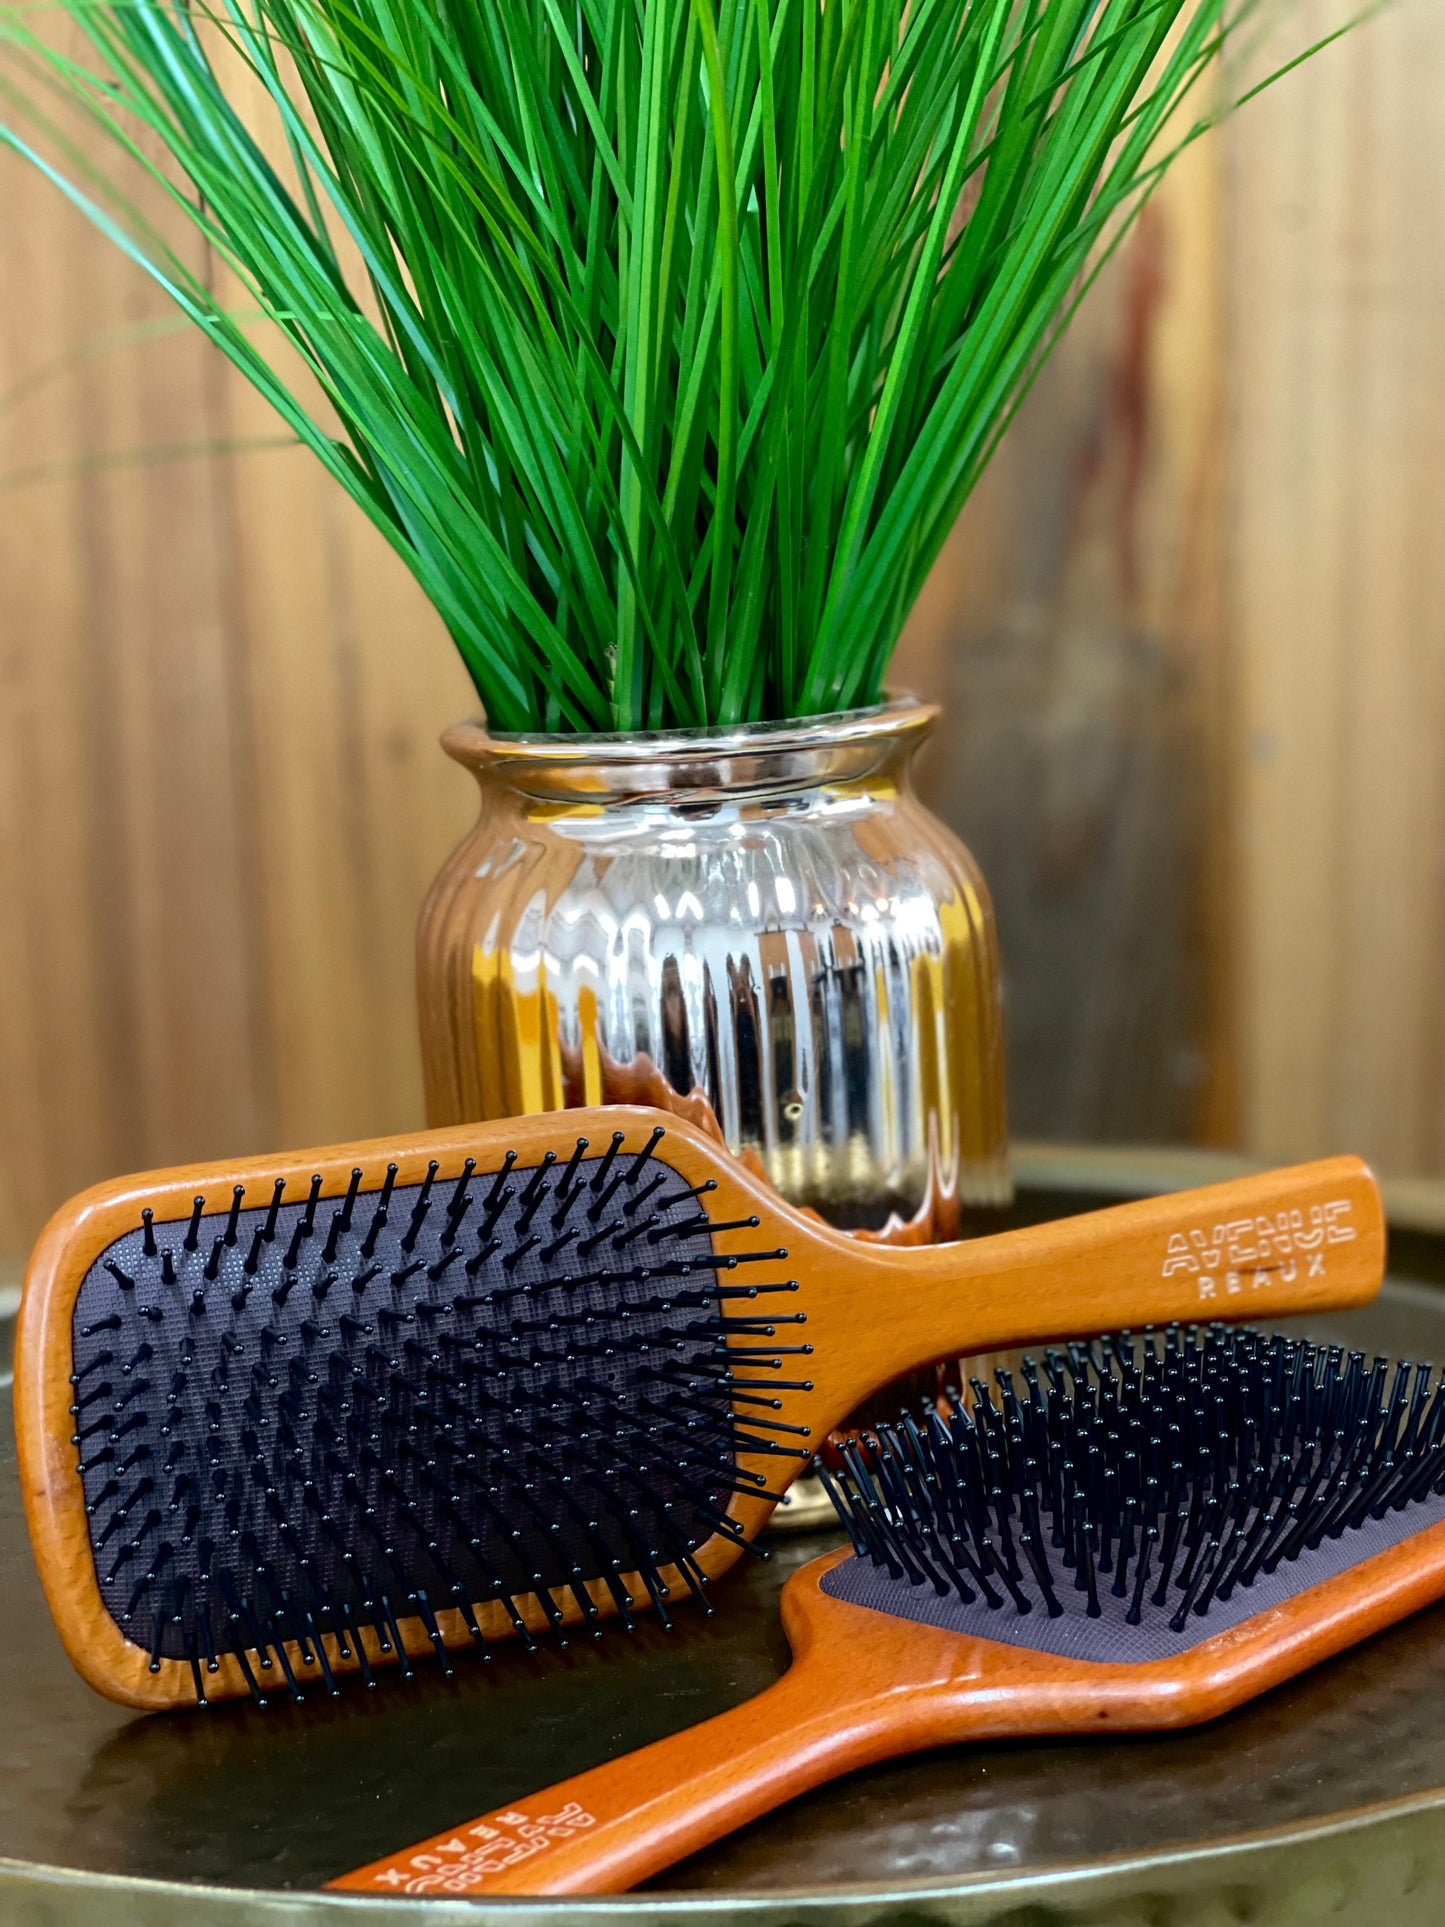 The Wooden Paddle Brush